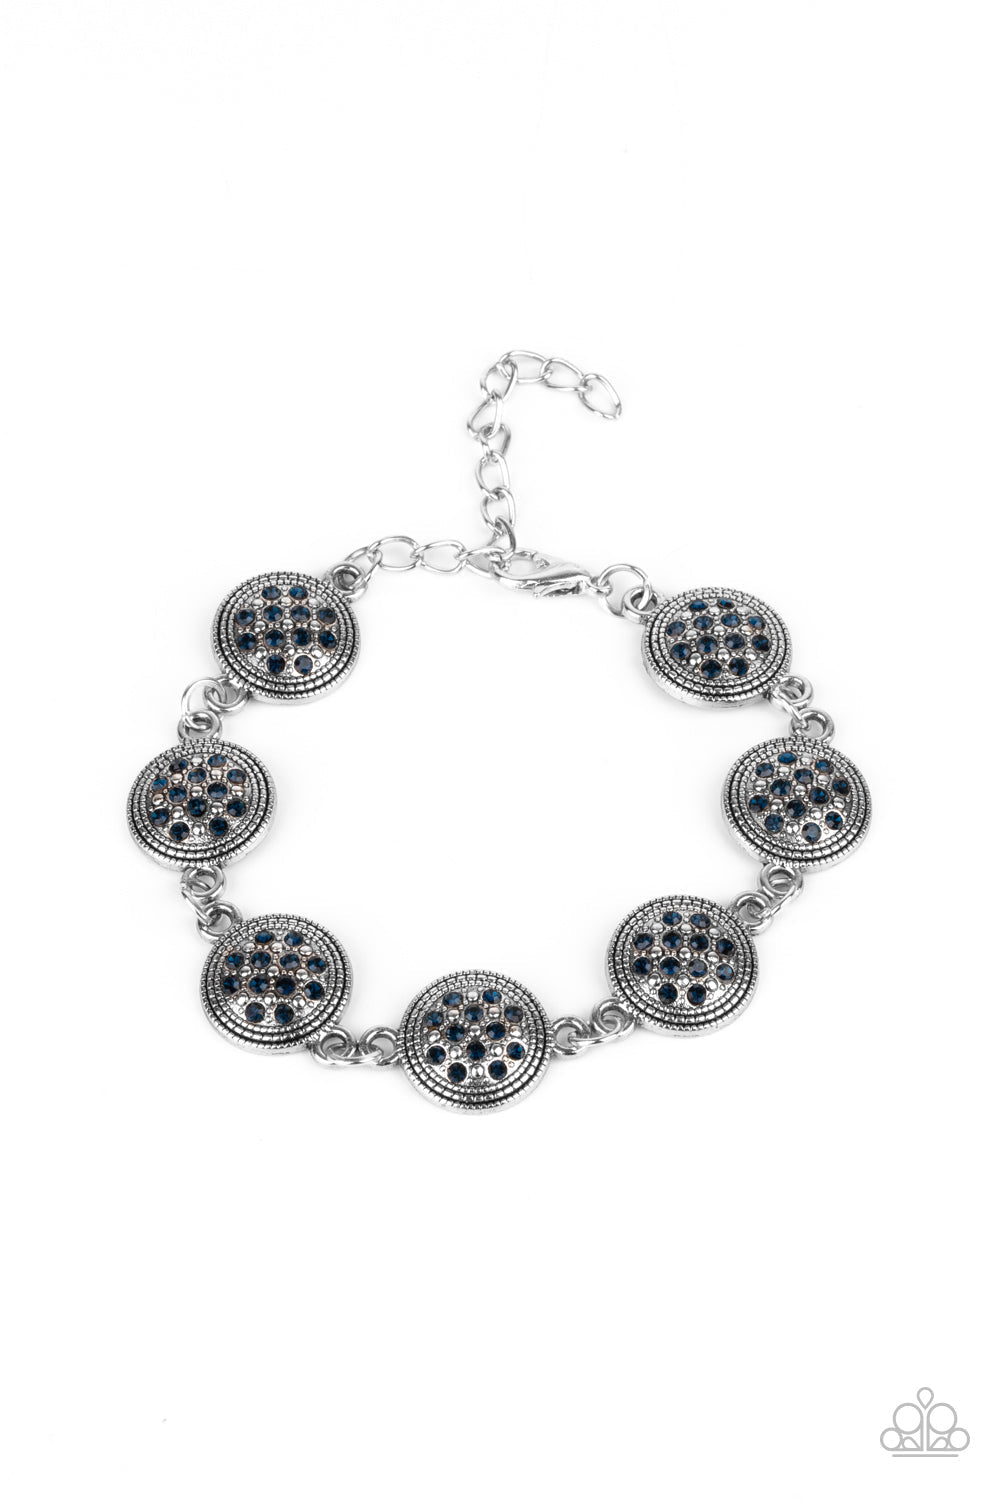 By Royal Decree - Blue and Silver Bracelet - Paparazzi Accessories - Glittery blue rhinestones, studded silver frames delicately connect around the wrist for a royal flair. Features an adjustable clasp closure.